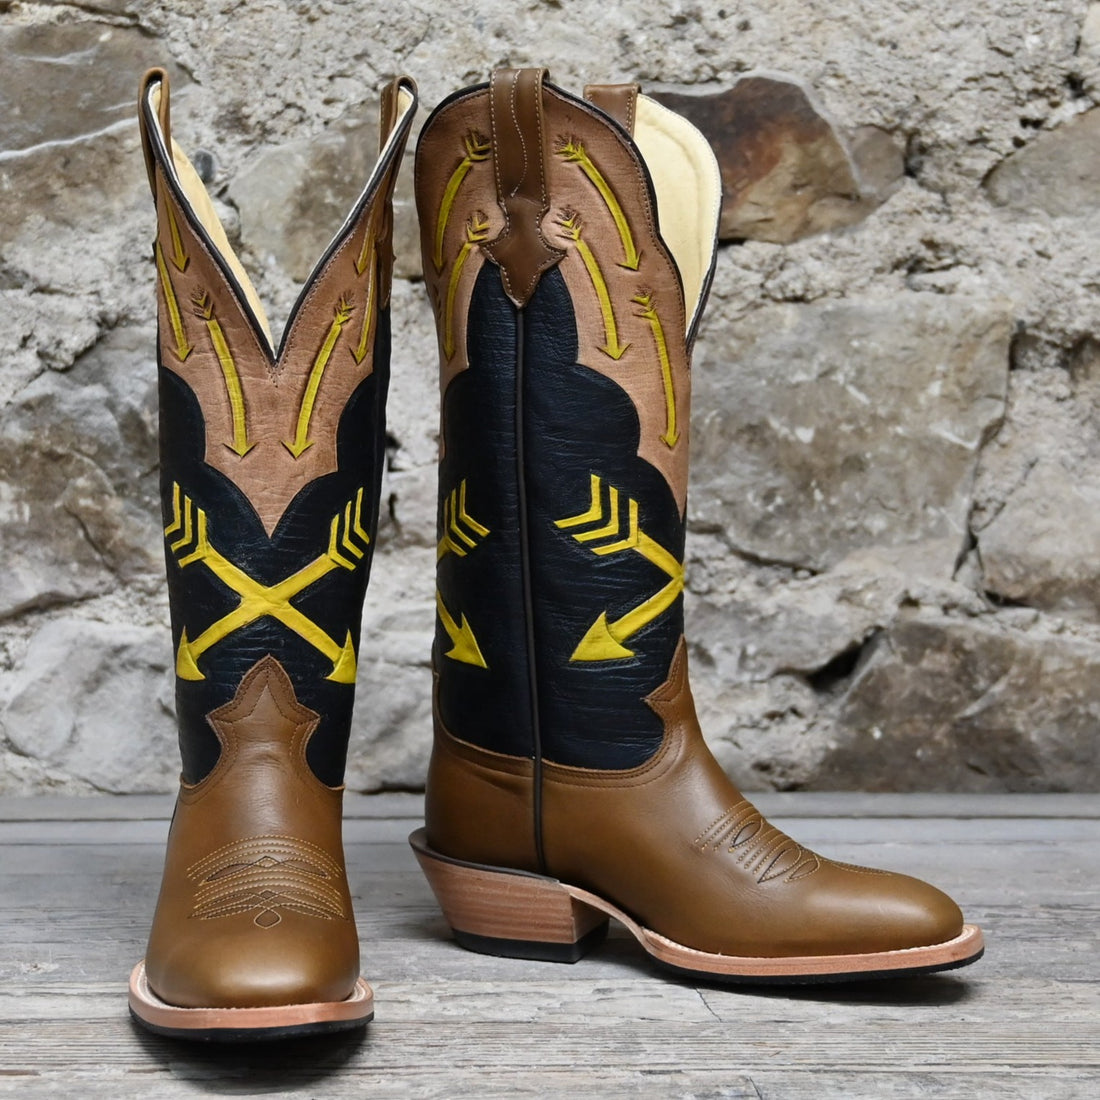 Mens Tan Boot withTooled Navy Blue and Gold Arrow Tops view of front and side